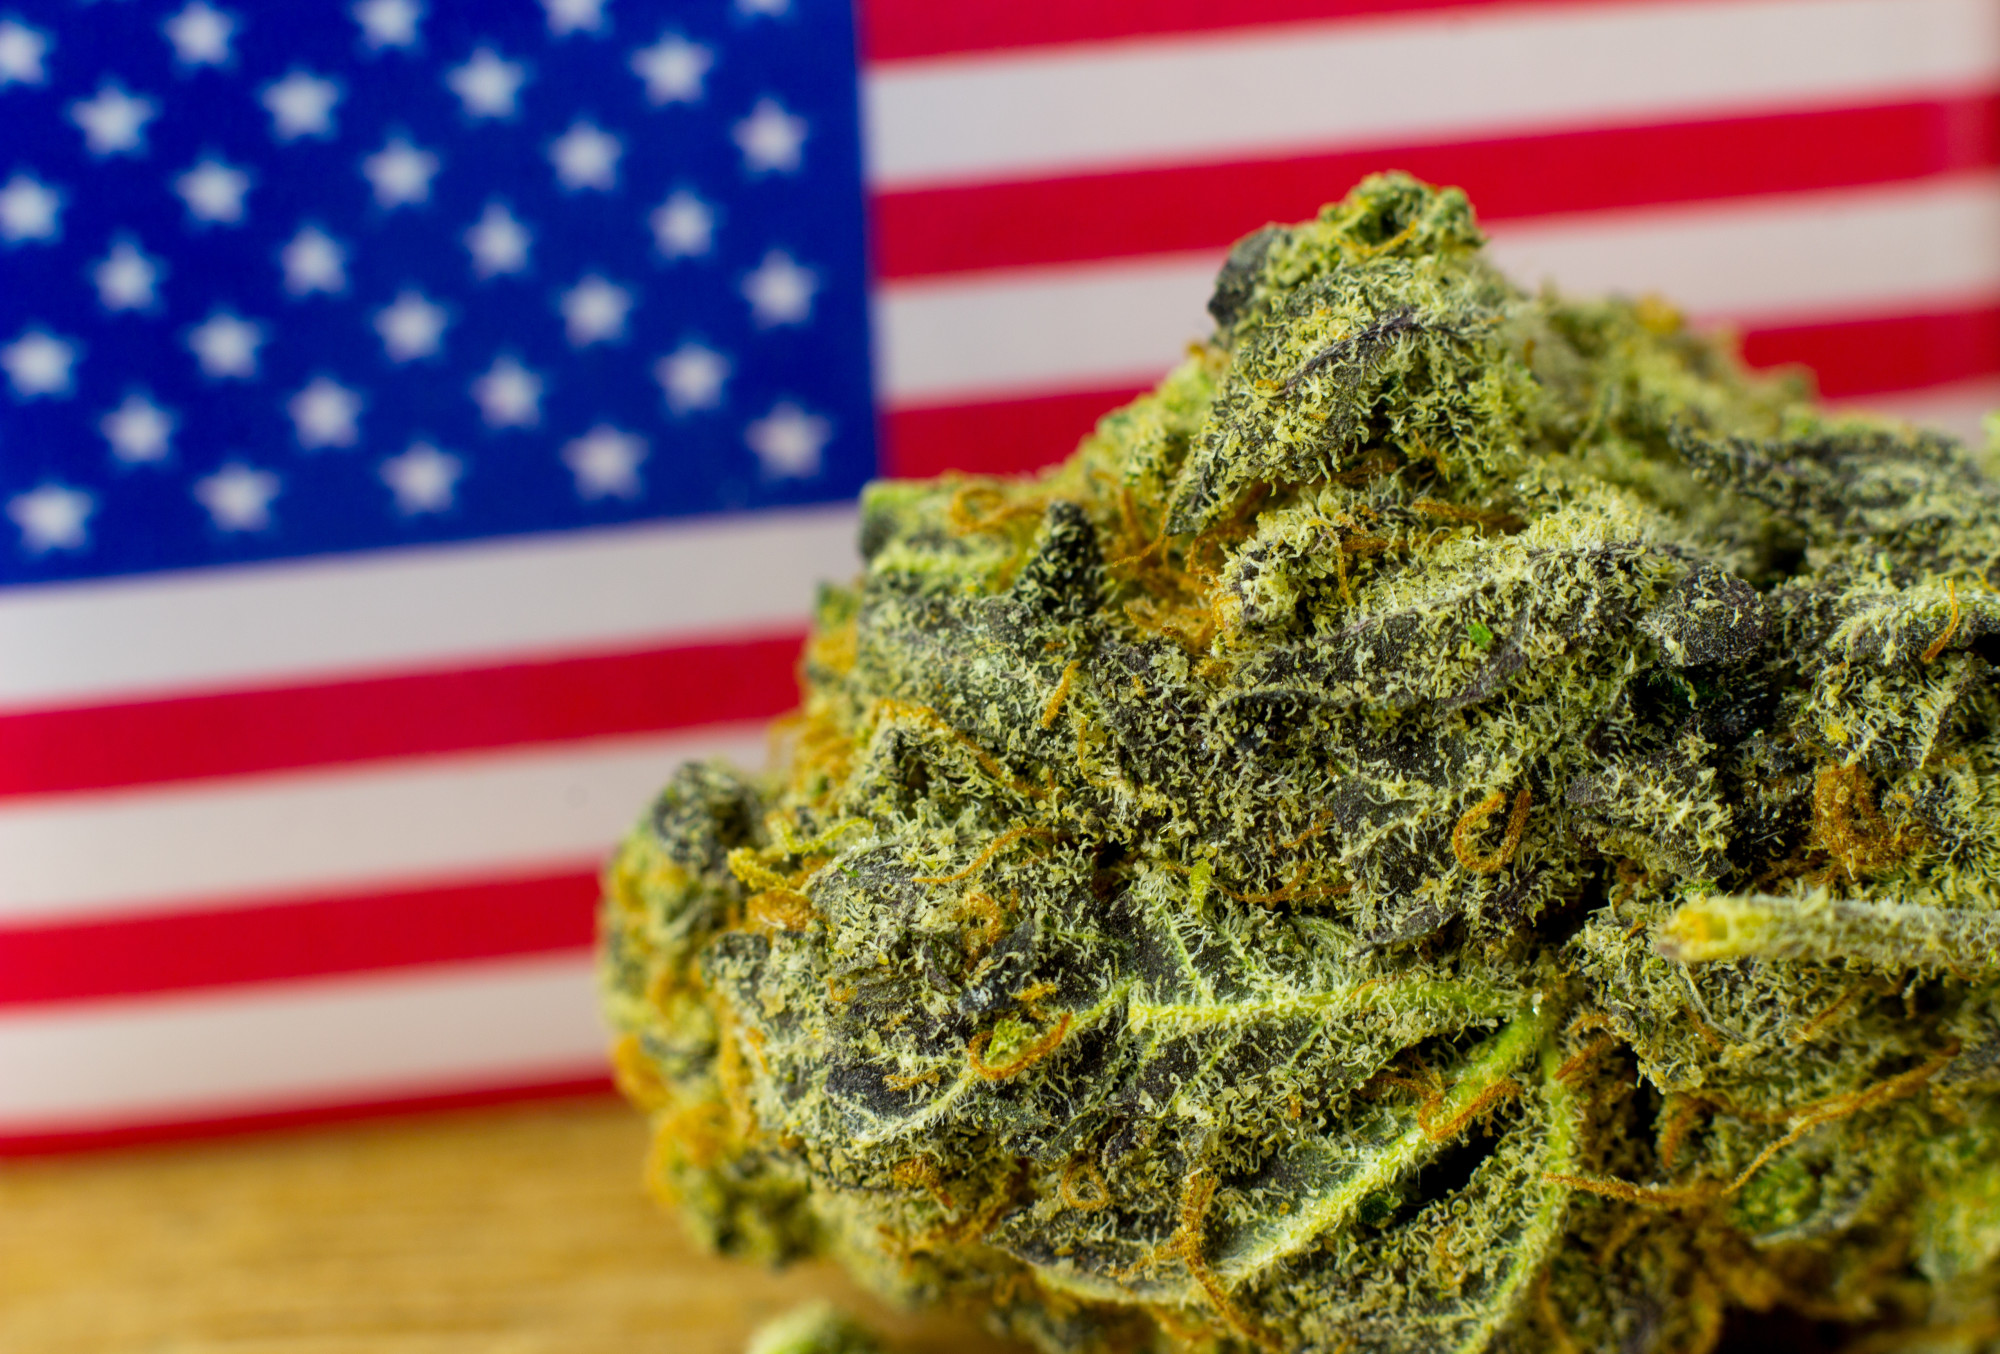 The Origin of the Bud: A History of Marijuana in the US